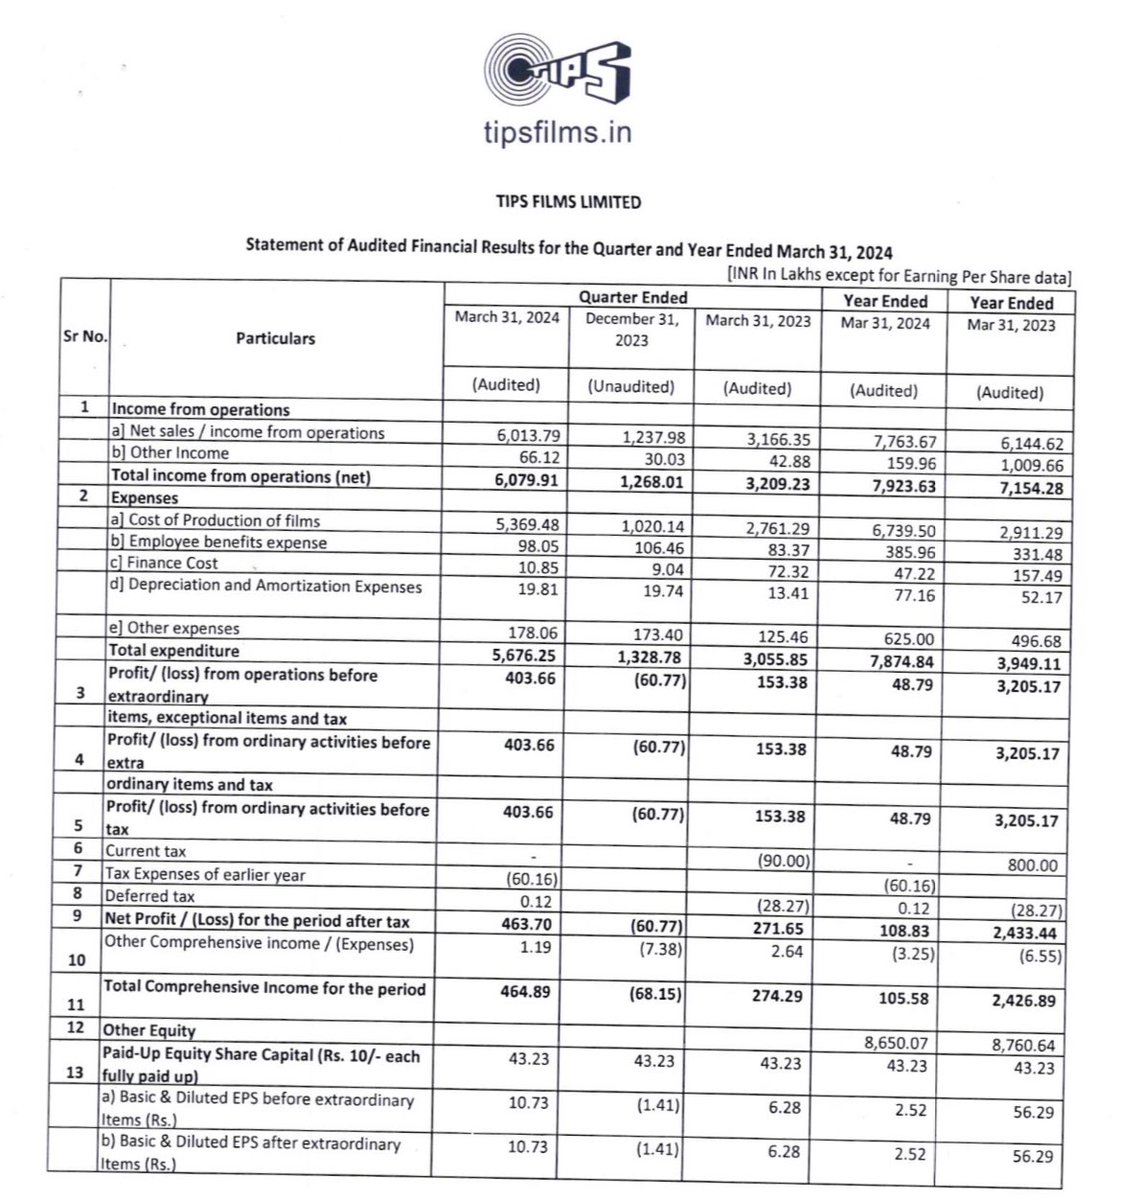 EXTREMELY EXTREMELY STRONG Q4FY24 RESULT BY TIPS FILMS 🔥🔥🔥 Q4FY24 Net Profit Of 4.6 CR VS Q3FY24 Loss of 60 lakhs VS Q4FY23 Net Profit Of 2.74 CR